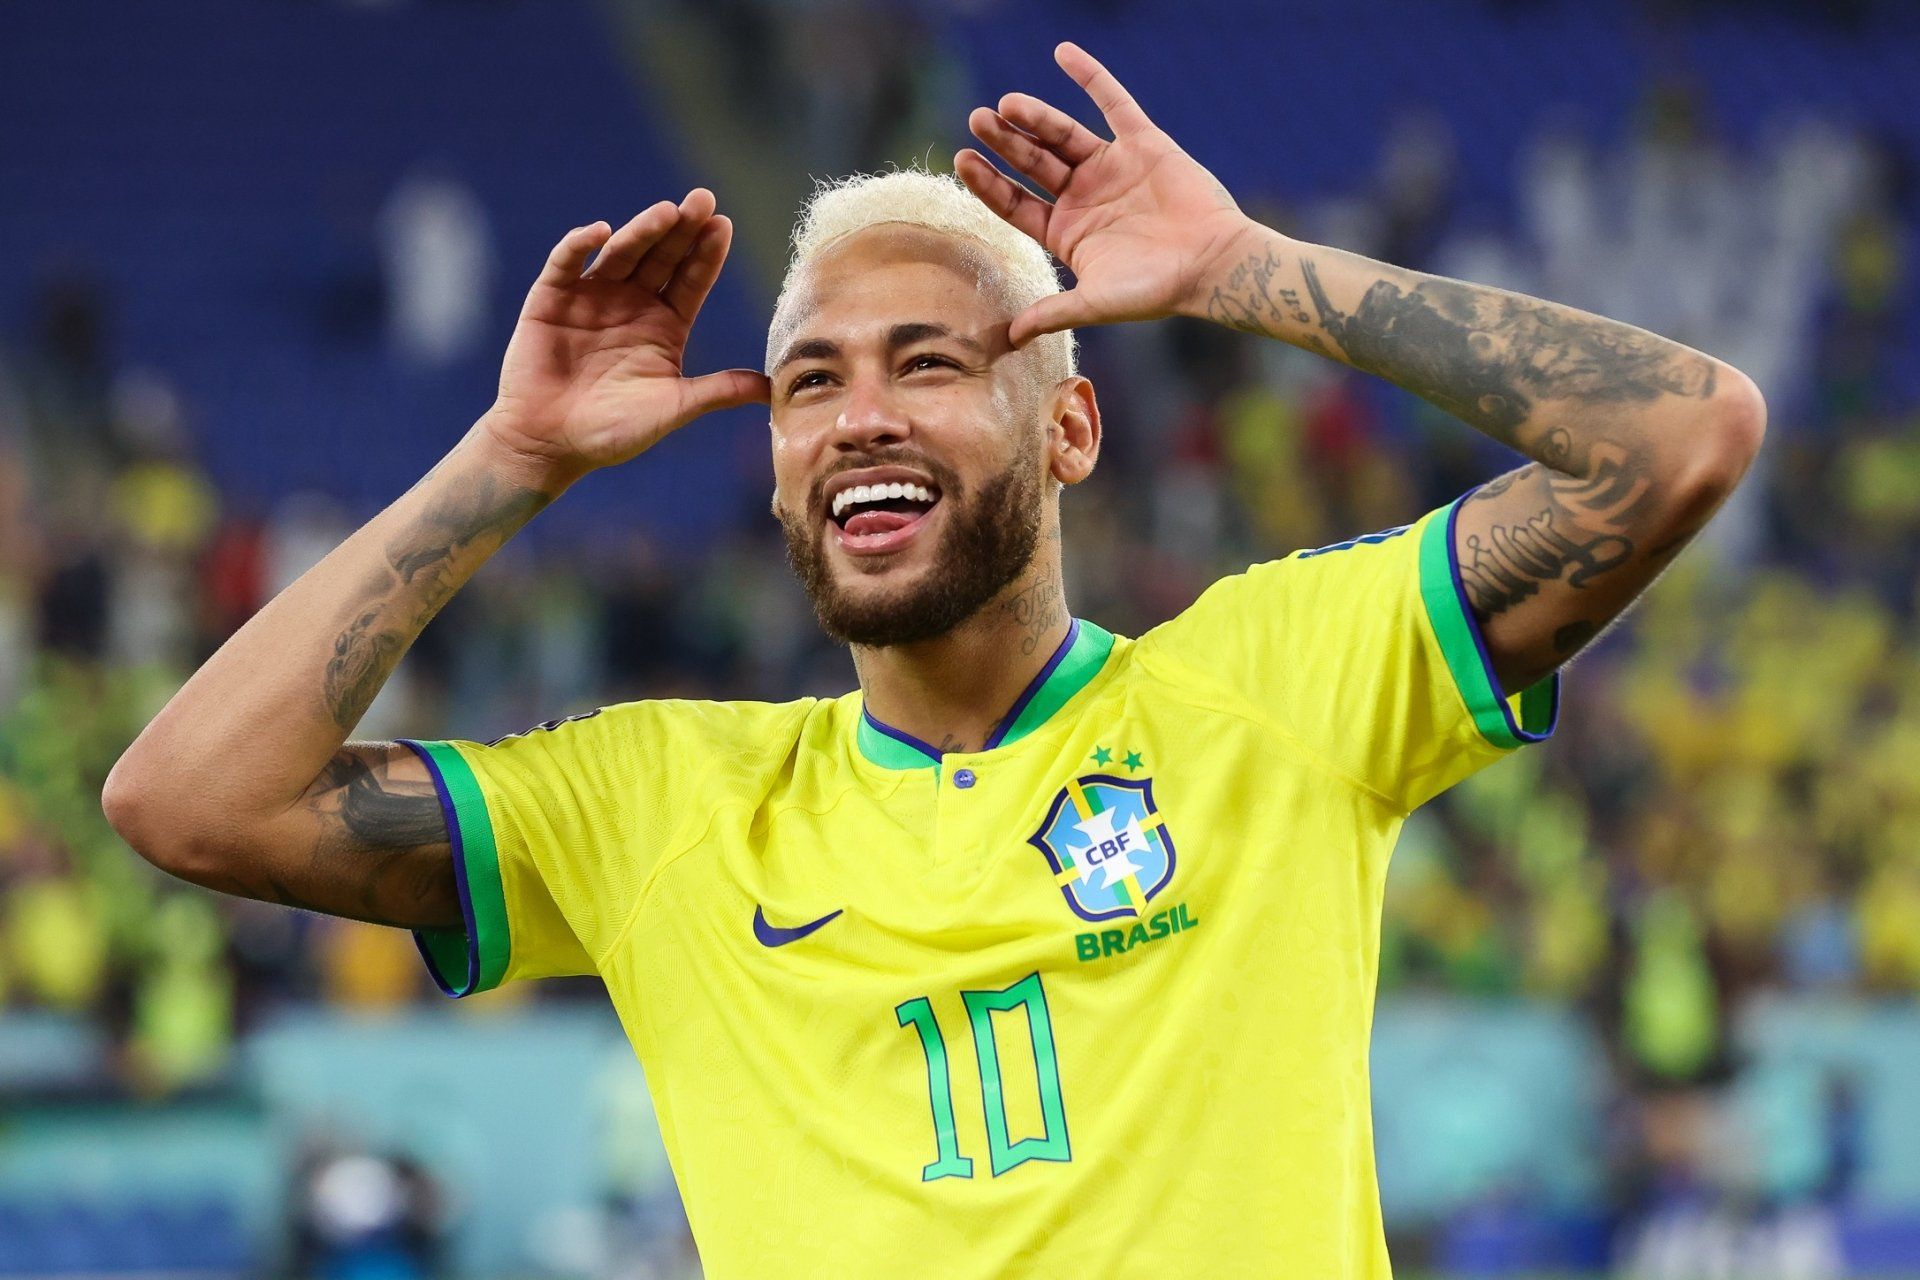 Brazil's forward Neymar celebrates after scoring a goal during the 2022 FIFA World Cup South American Qualifiers football match against Peru at the Arena Corinthians stadium in Sao Paulo on November 14, 2020. - Brazil won the match 2-0. (Photo by MAURO PIMENTEL / AFP) / Brazil OUT (Photo by MAURO PIMENTEL/AFP via Getty Images - Neymar